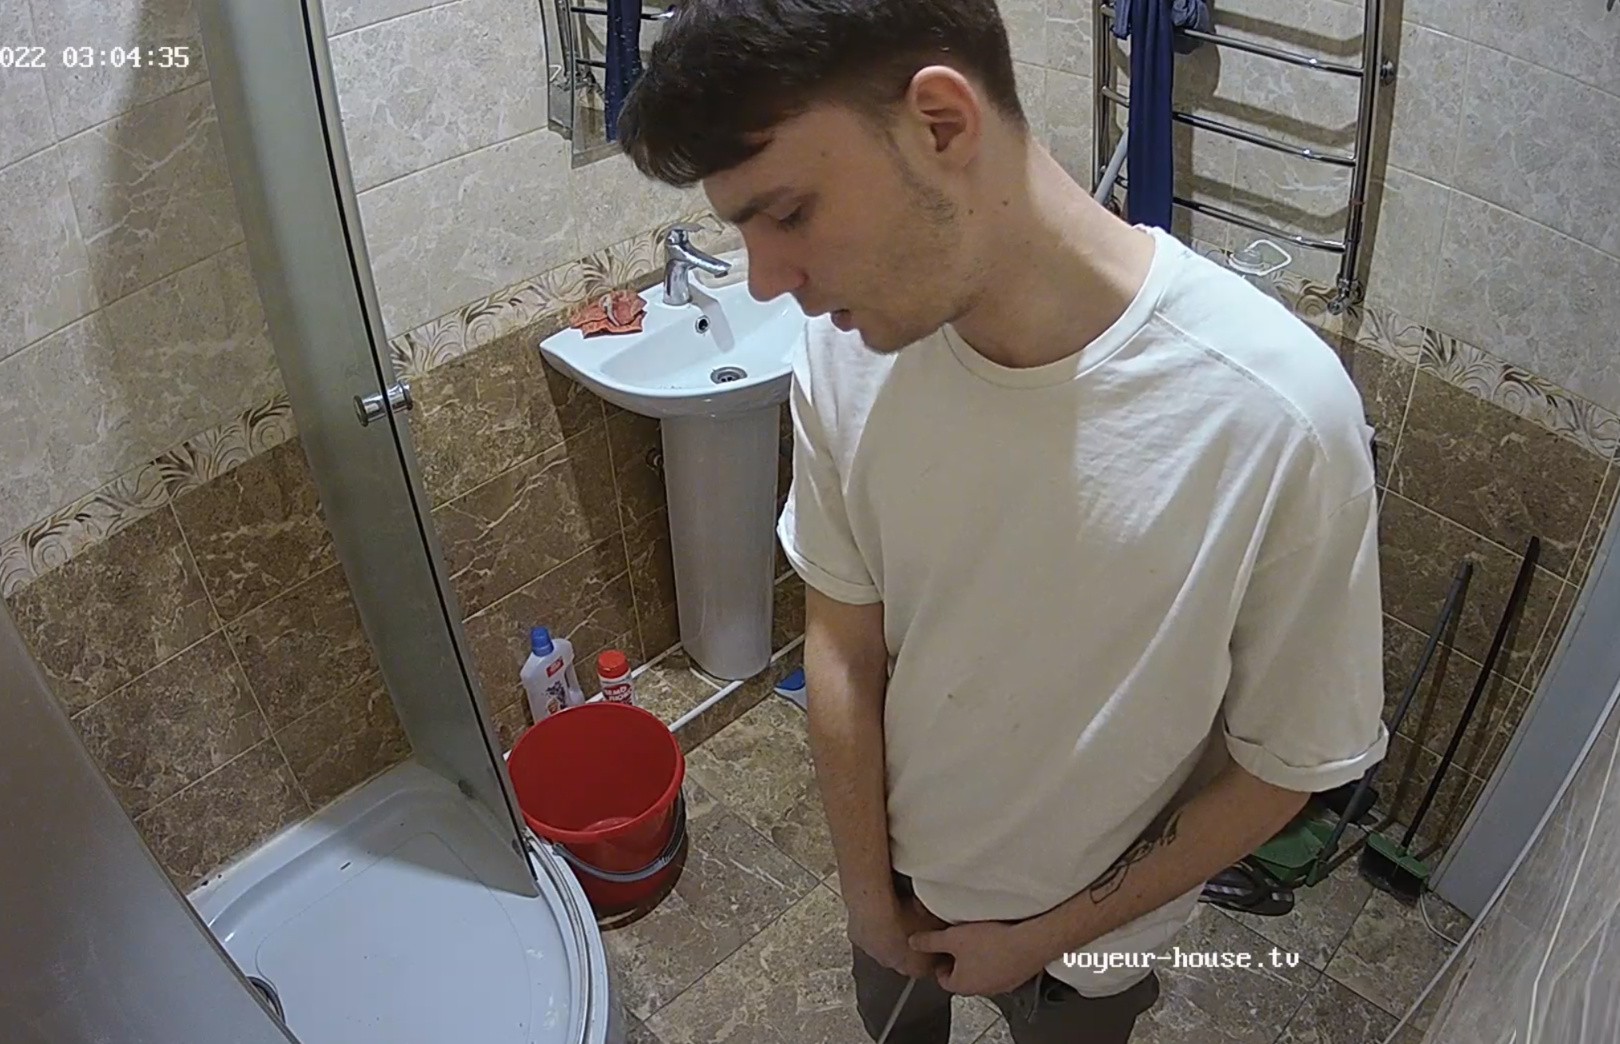 voyeur pictures of guys peeing Sex Images Hq